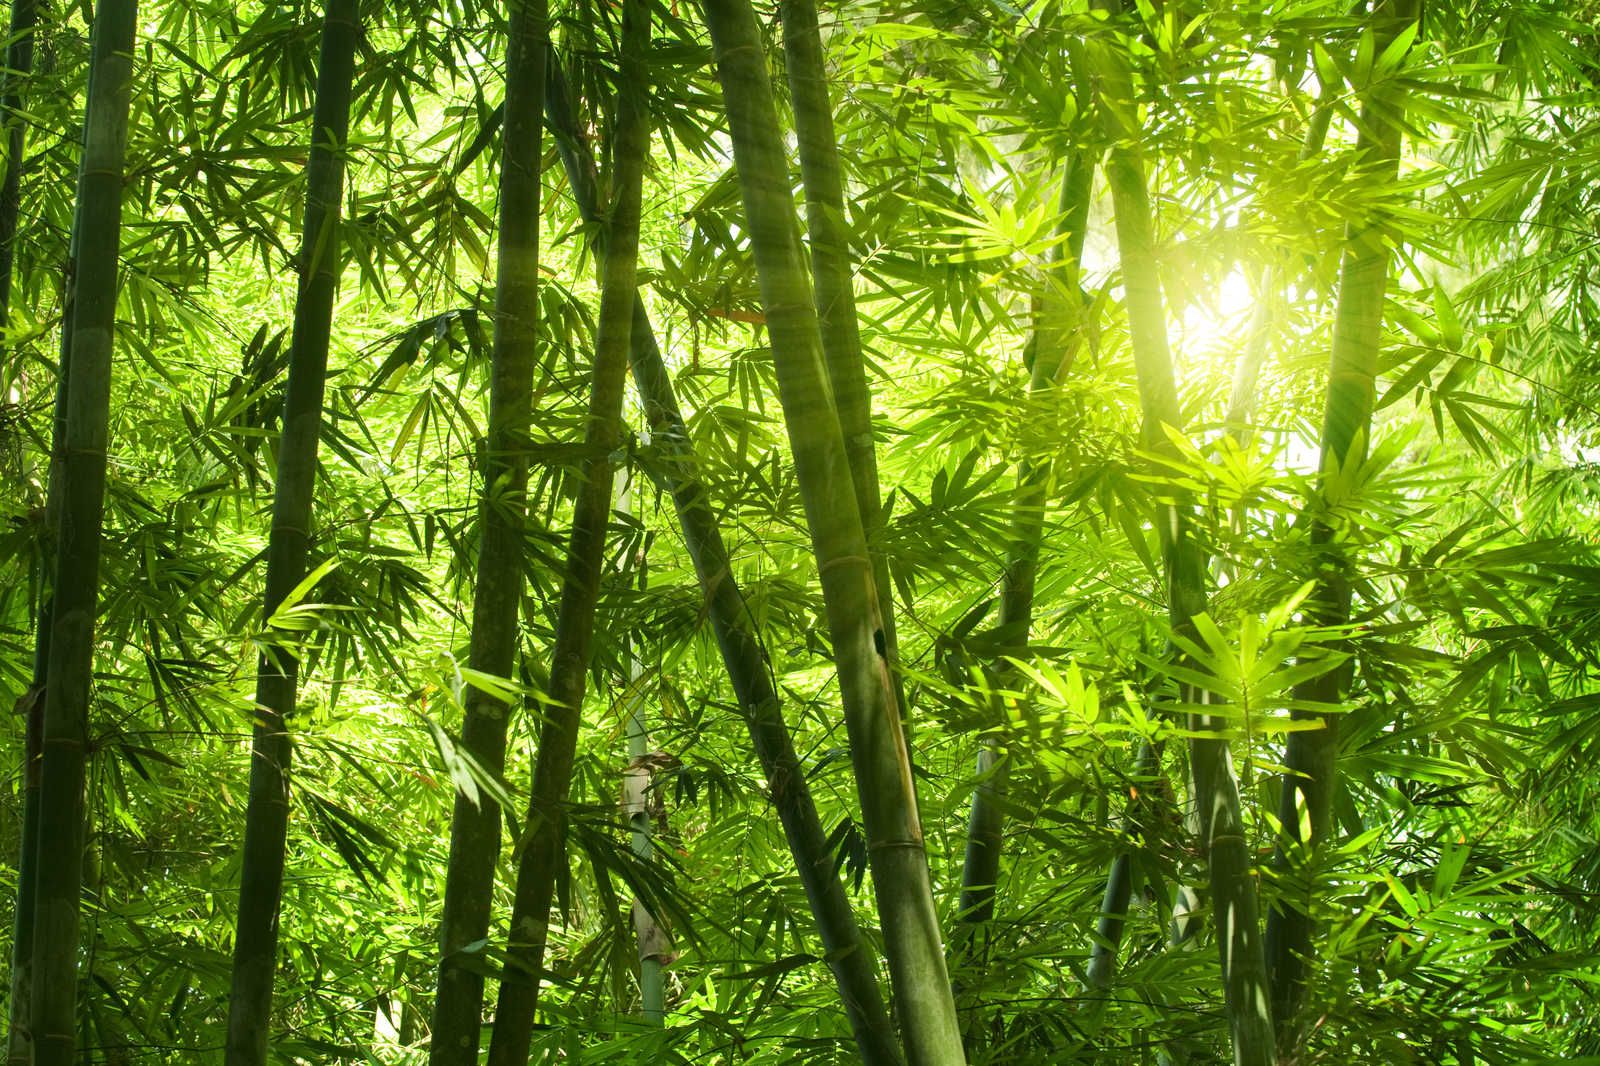             Canvas painting Bamboo and Leaves - 1.20 m x 0.80 m
        